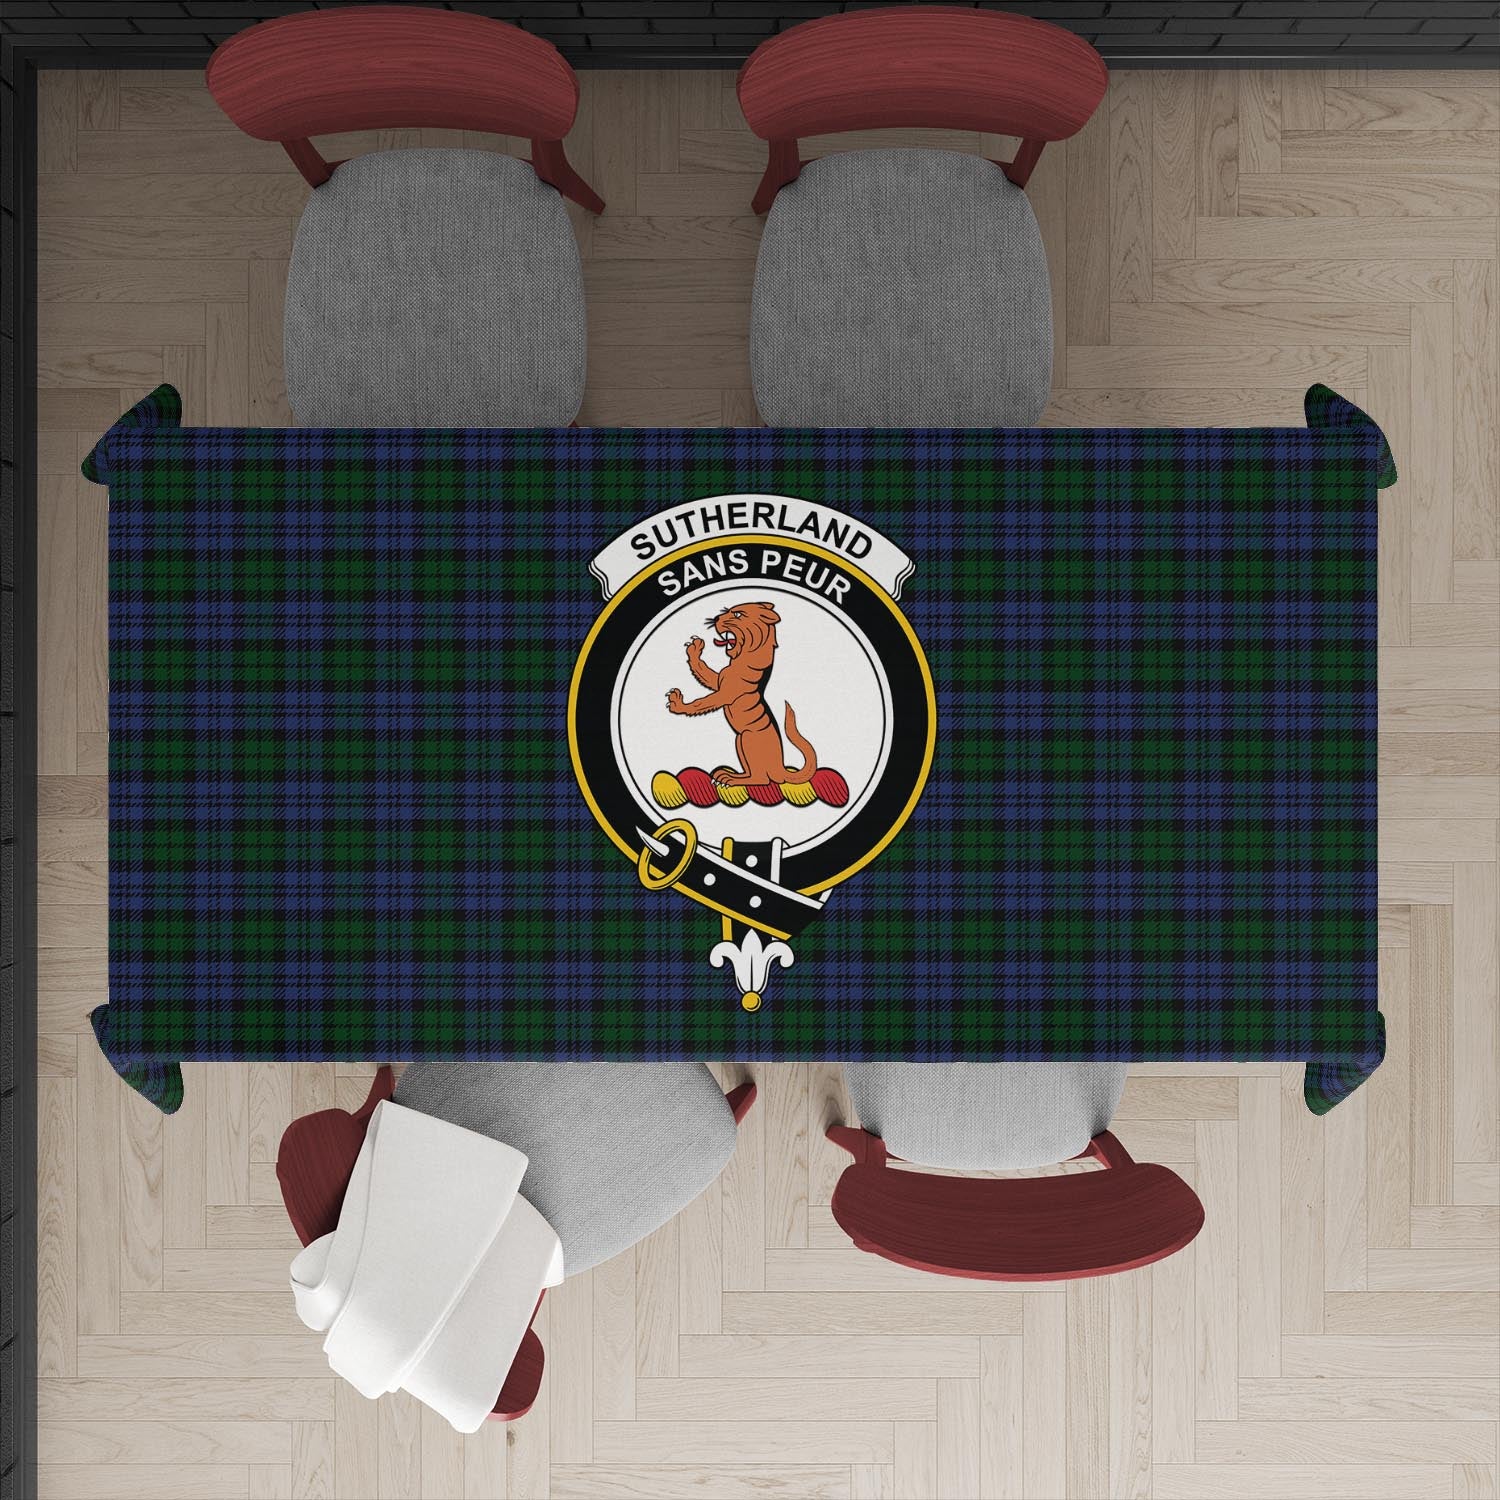 sutherland-tatan-tablecloth-with-family-crest